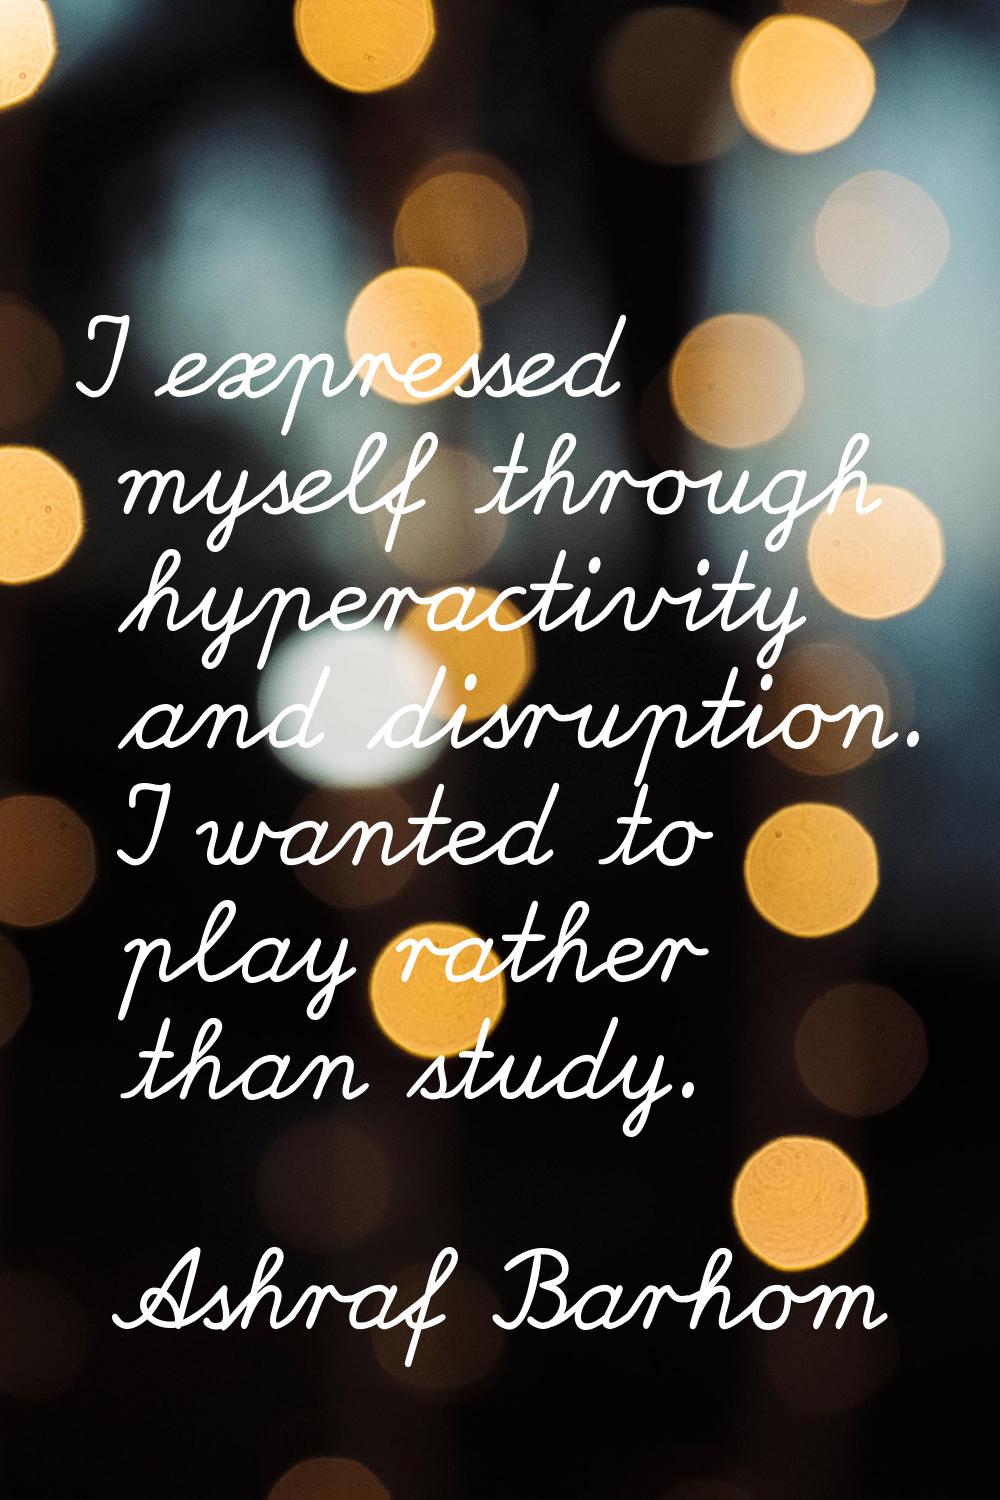 I expressed myself through hyperactivity and disruption. I wanted to play rather than study.